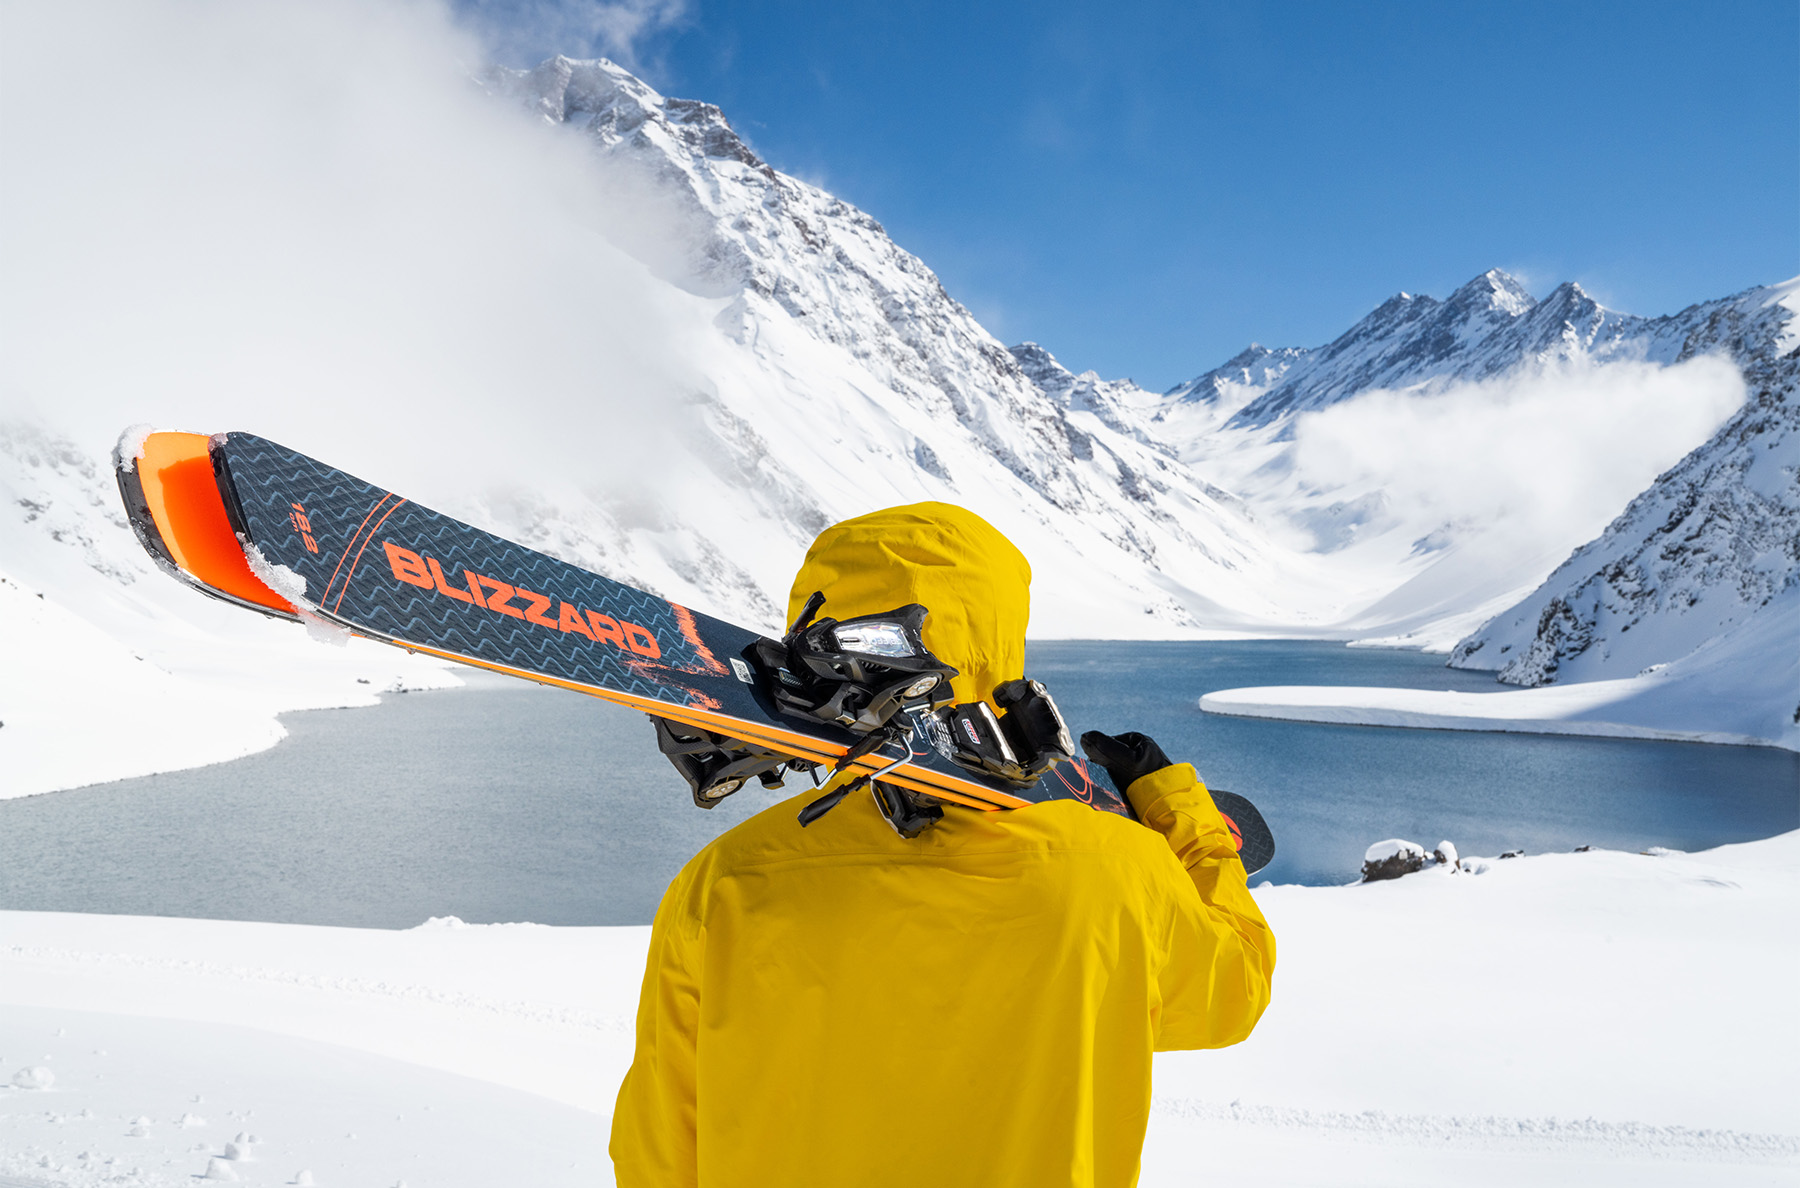 Blizzard just announced a brand-new line of all-mountain skis. BLISTER discusses the details on the 2024-2025 Blizzard Anomaly skis.